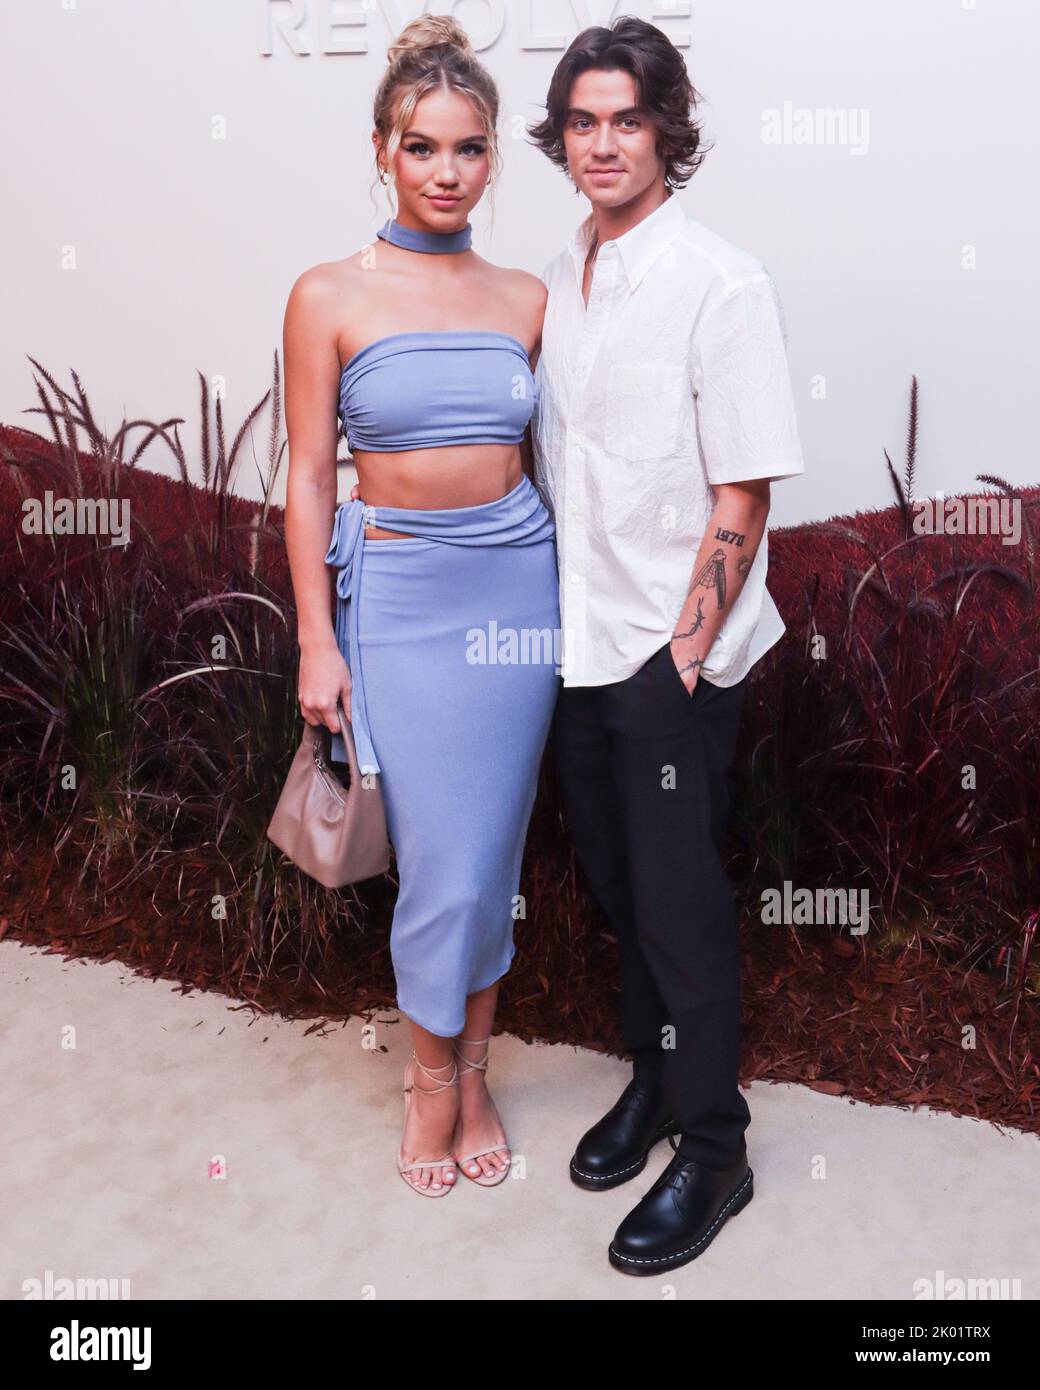 New York City, United States. 08th Sep, 2022. MANHATTAN, NEW YORK CITY, NEW YORK, USA - SEPTEMBER 08: Emma Brooks McAllister and Zack Lugo arrive at the REVOLVE Gallery NYFW (New York Fashion Week) 2022 Presentation VIP Opening Event held at The Shops at Hudson Yards on September 8, 2022 in Manhattan, New York City, New York, United States. (Photo by Christian Lora/Image Press Agency) Credit: Image Press Agency/Alamy Live News Stock Photo